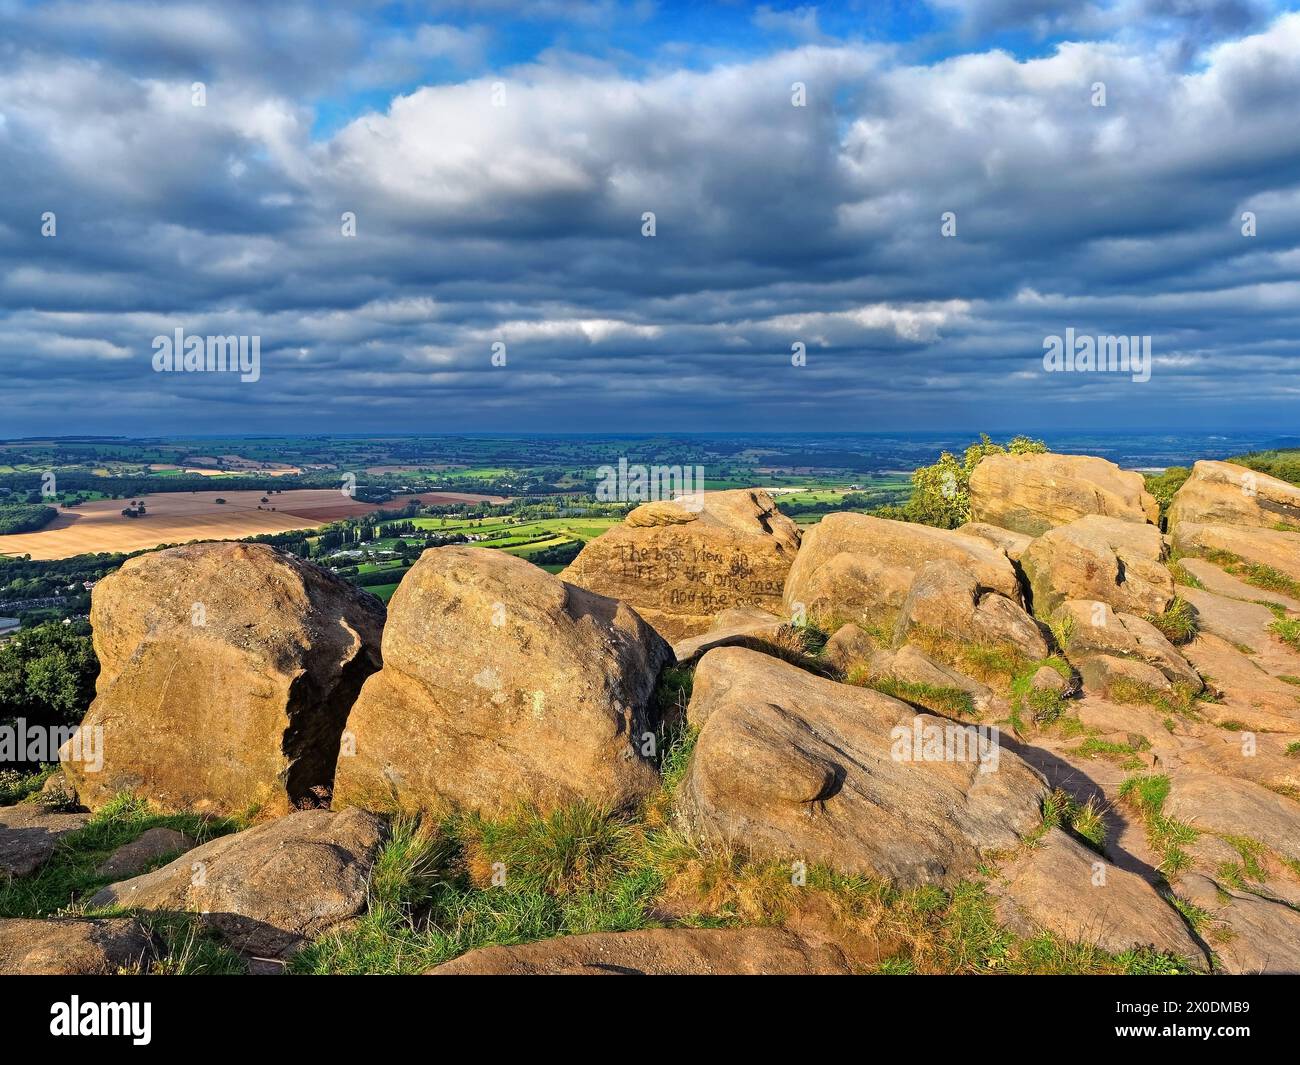 UK, West Yorkshire, Otley, Otley Chevin, Surprise View looking over Otley. Stock Photo